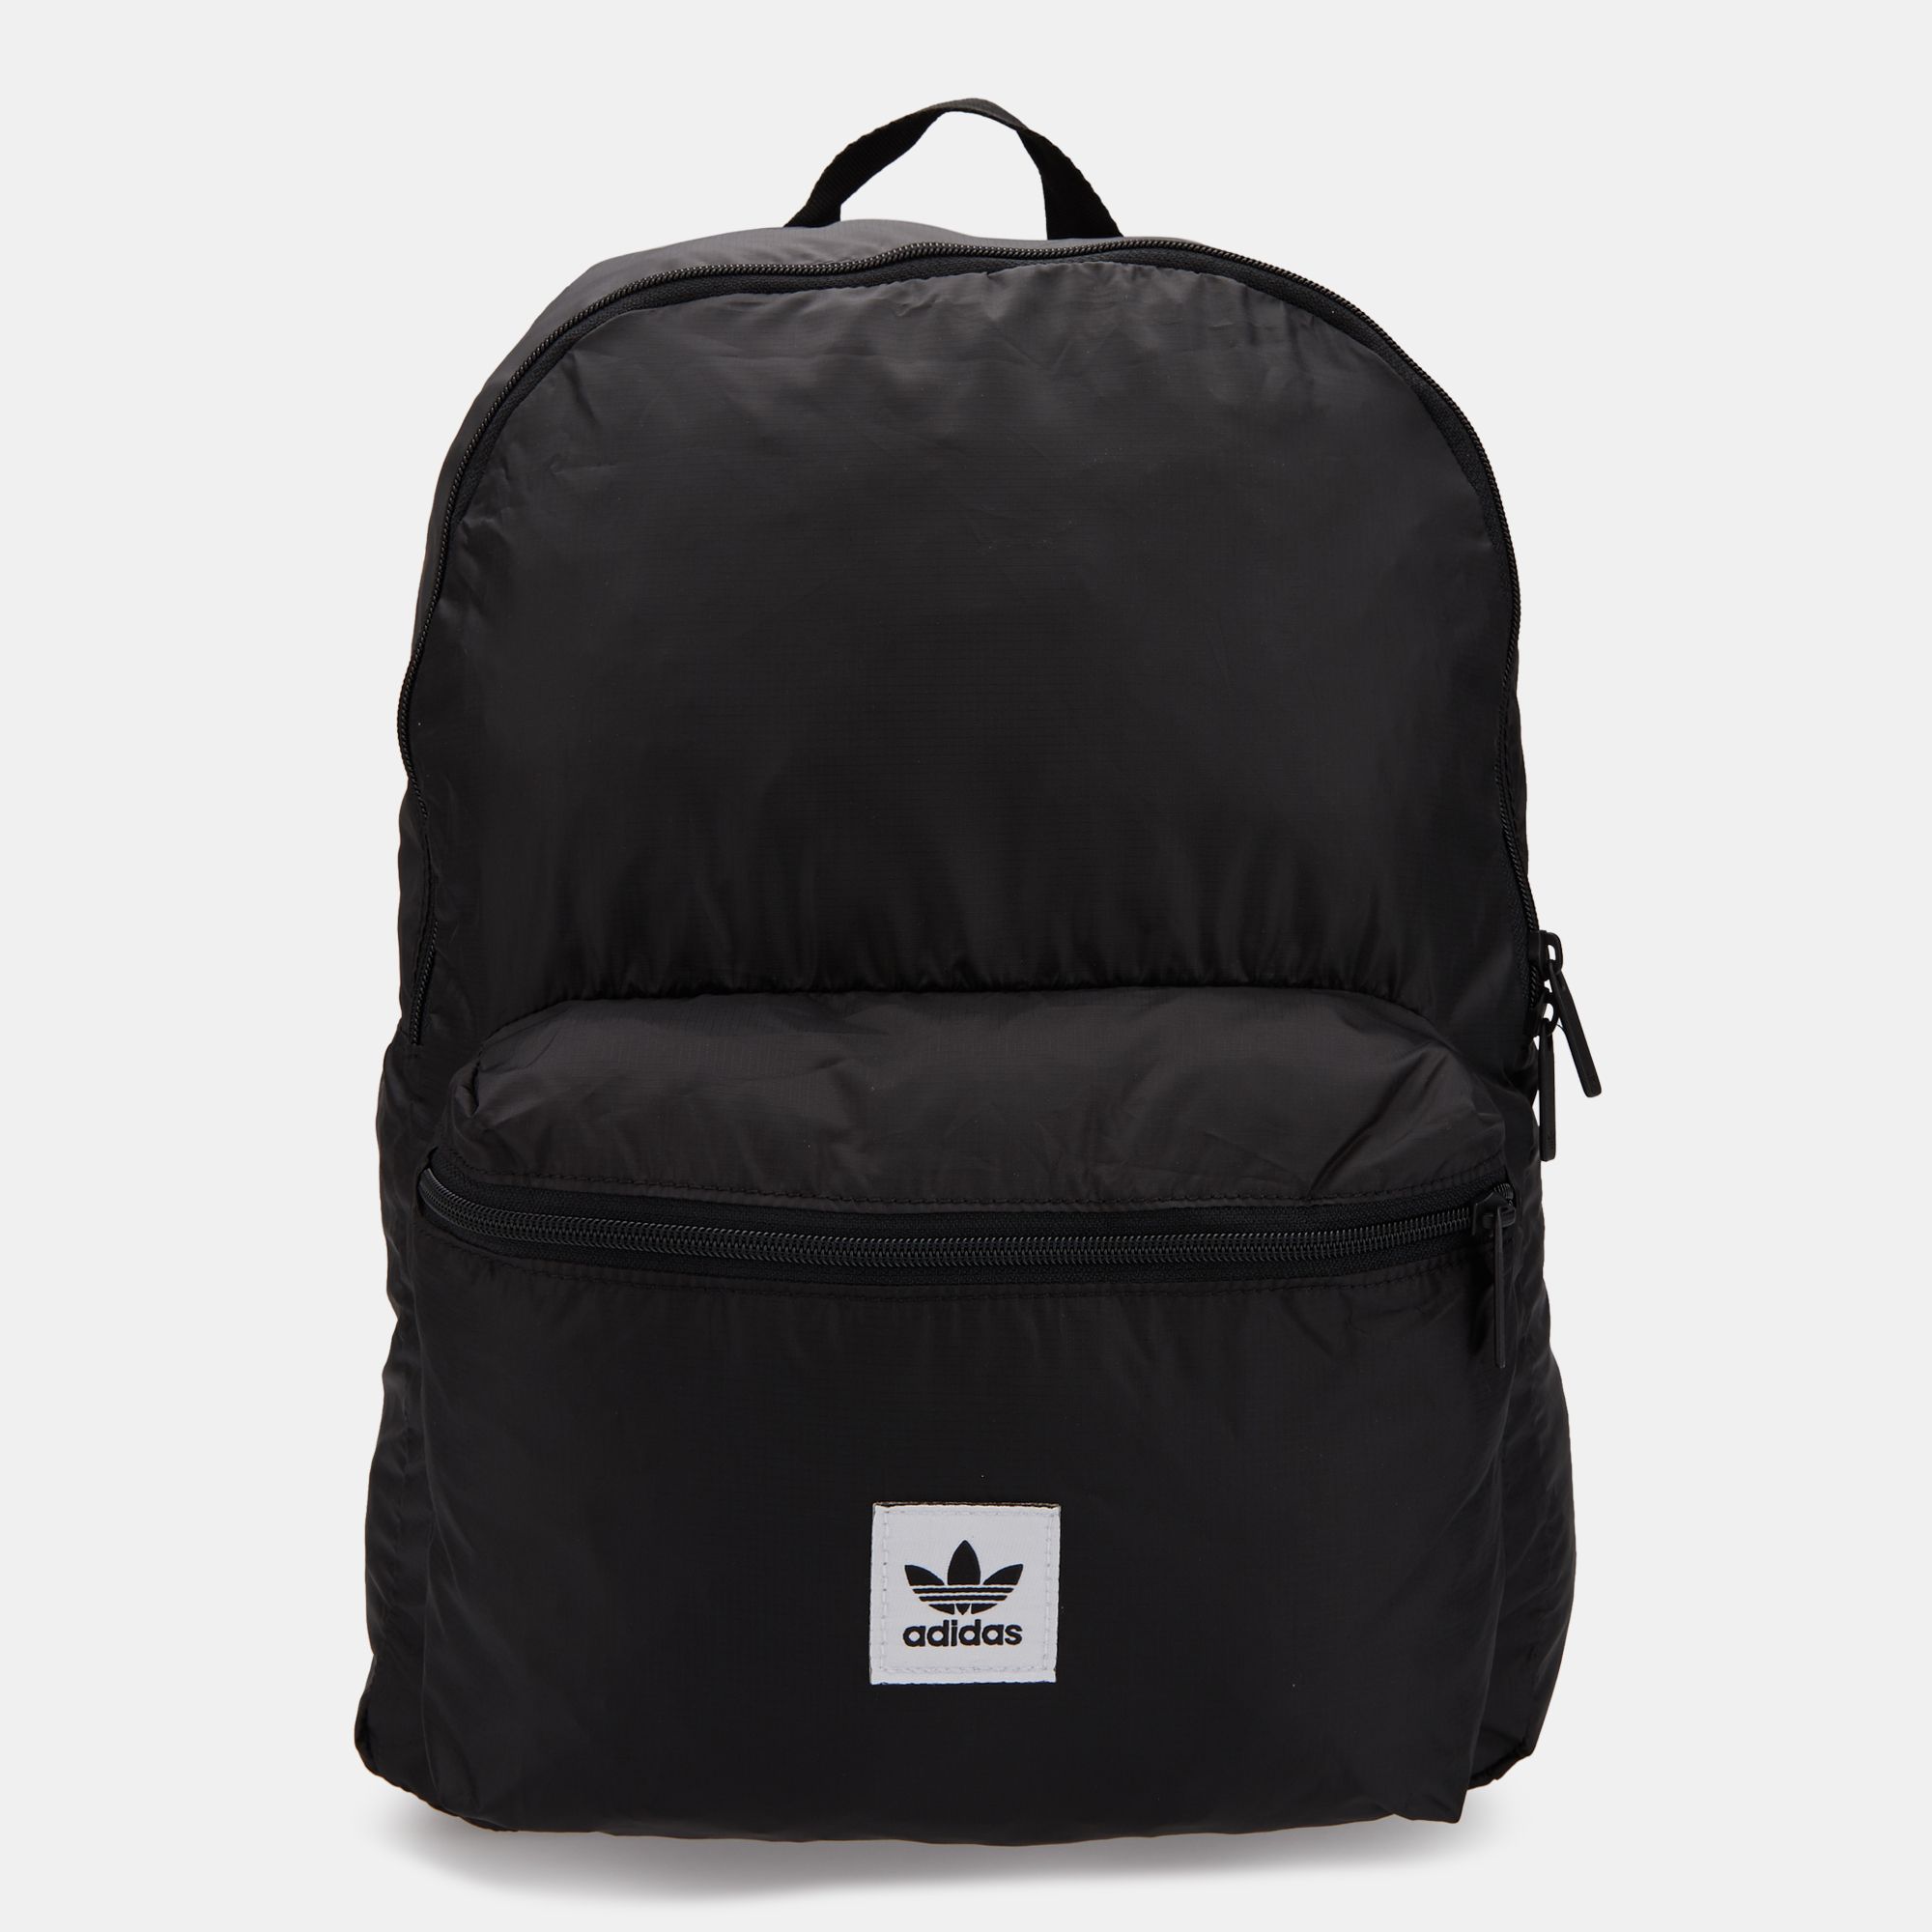 adidas packable